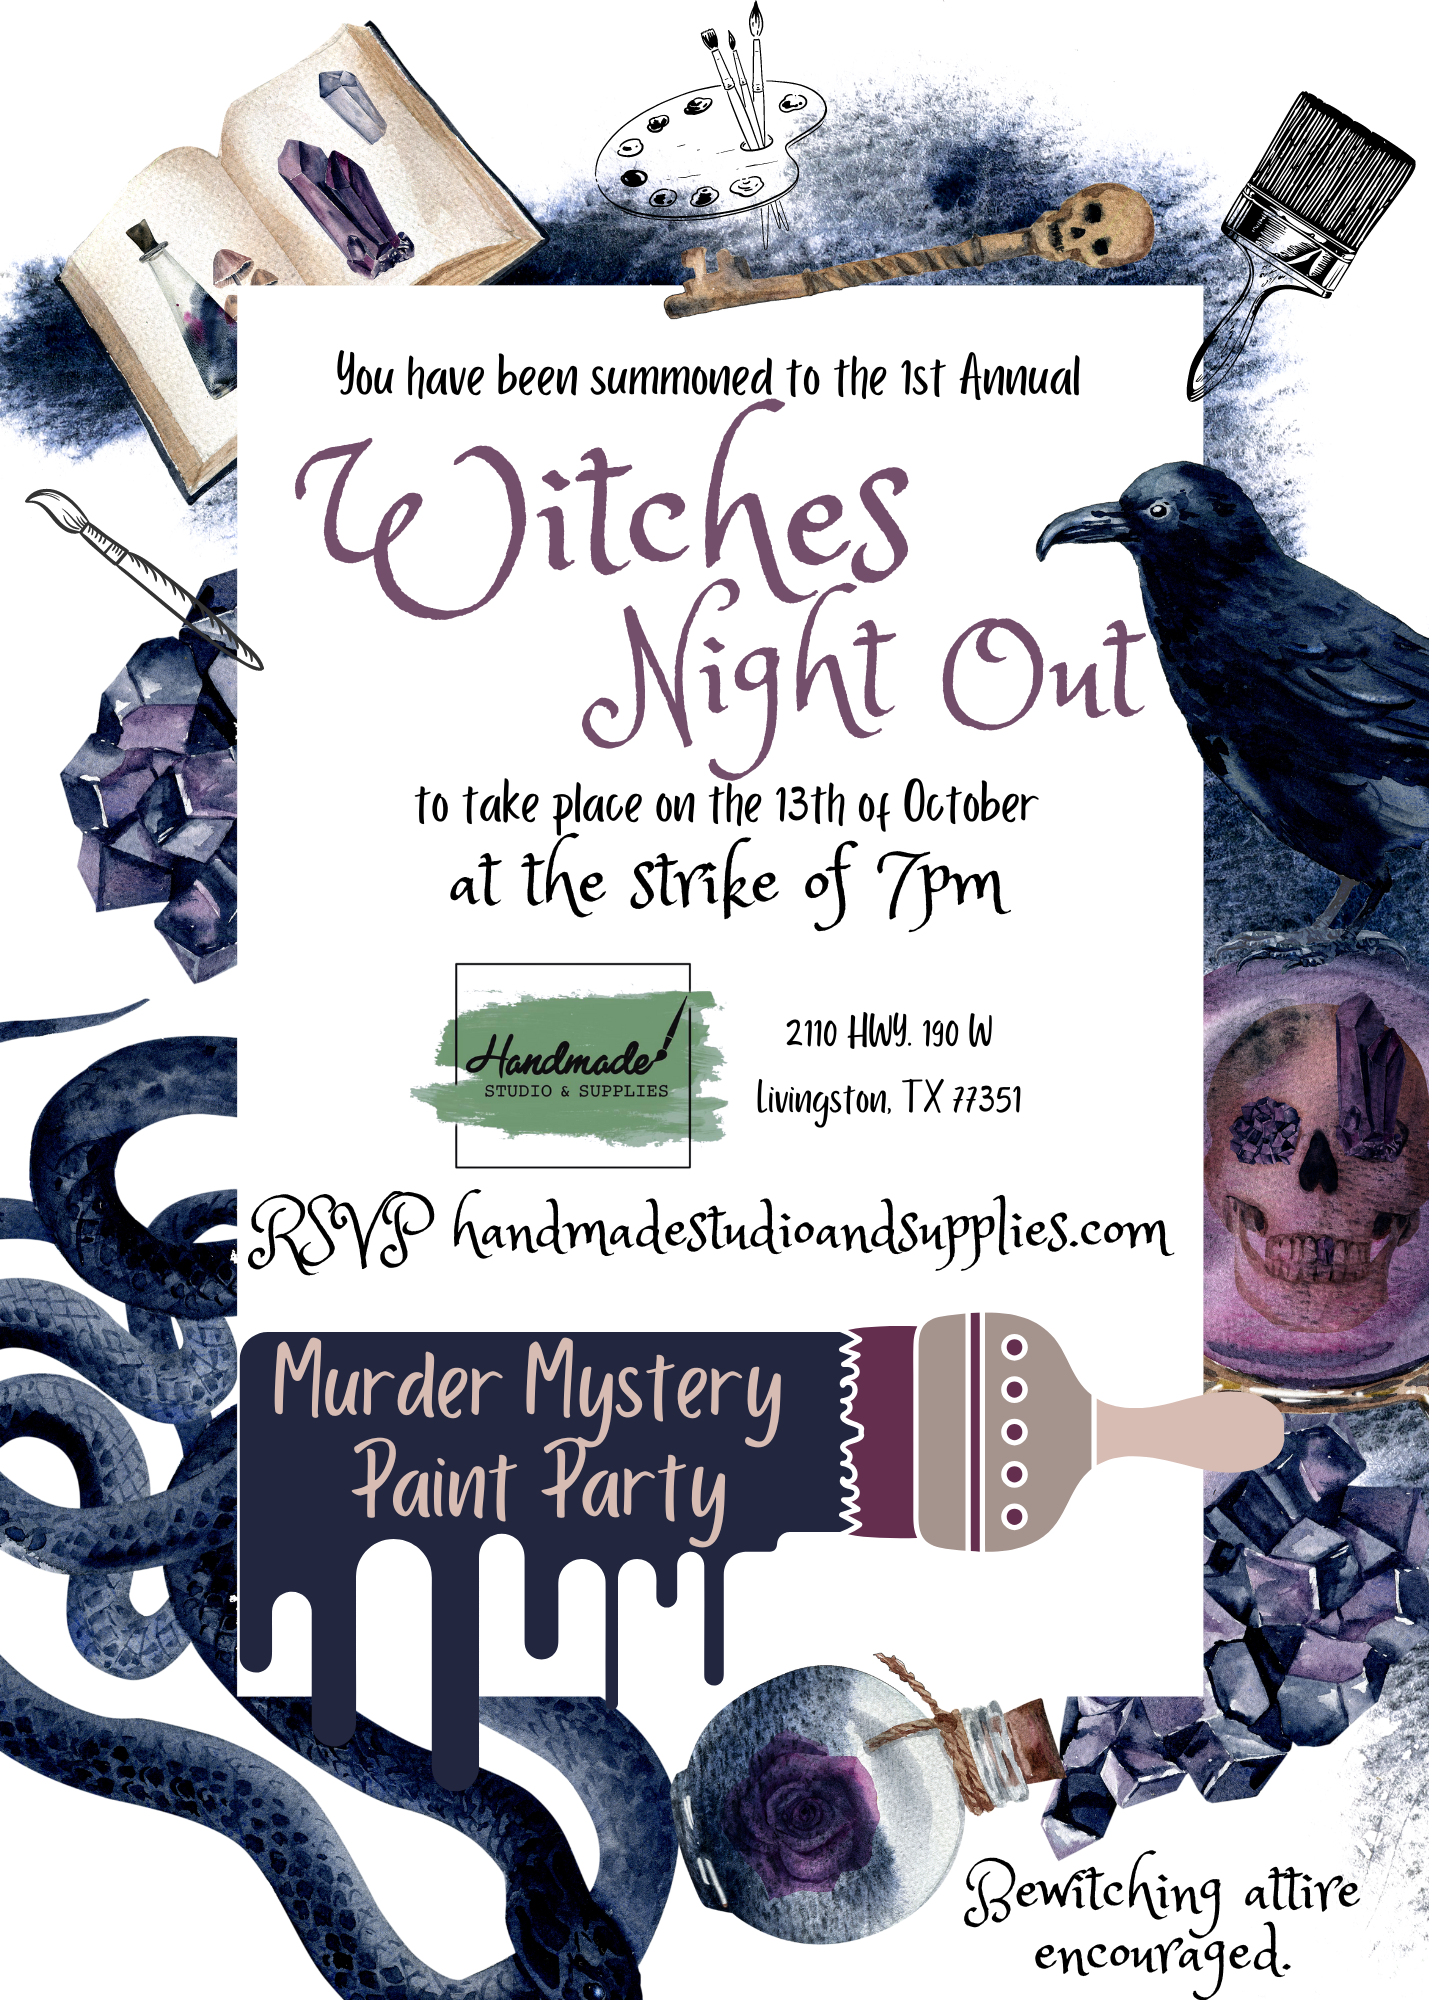 Witches Night Out - a murder mystery paint party 10/13 @7pm